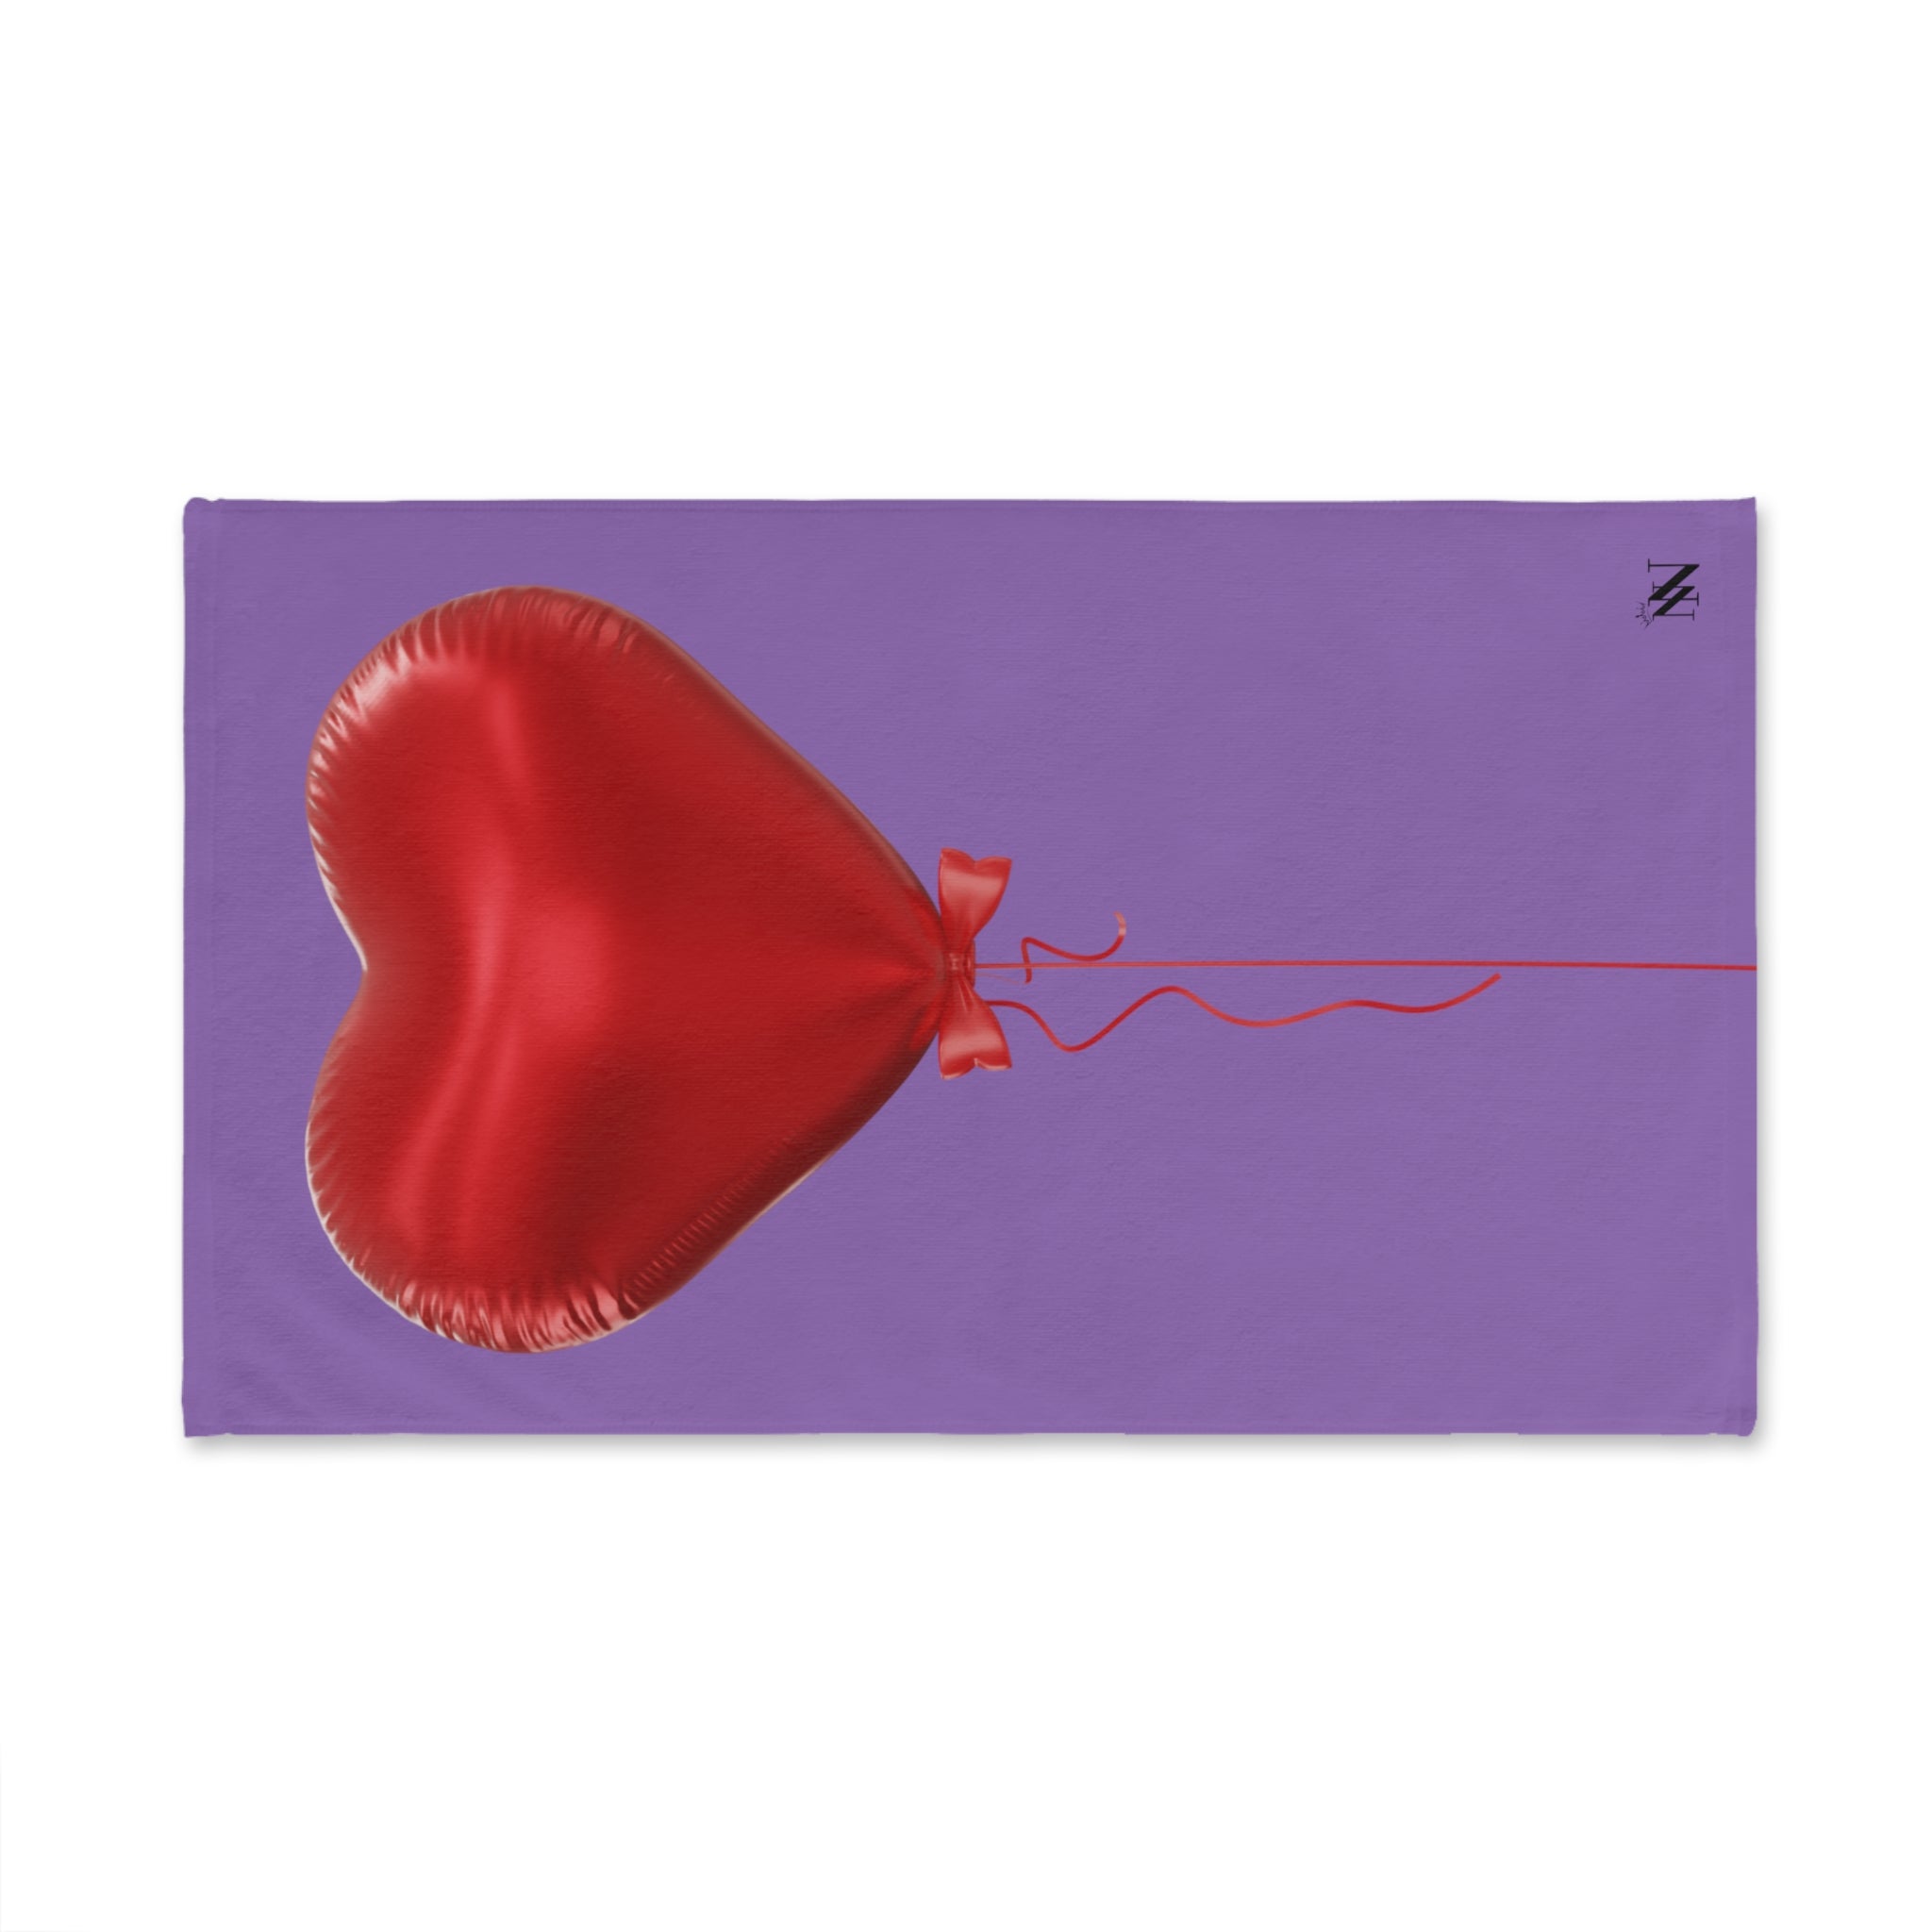 Red Balloon 3D Lavendar | Funny Gifts for Men - Gifts for Him - Birthday Gifts for Men, Him, Husband, Boyfriend, New Couple Gifts, Fathers & Valentines Day Gifts, Hand Towels NECTAR NAPKINS